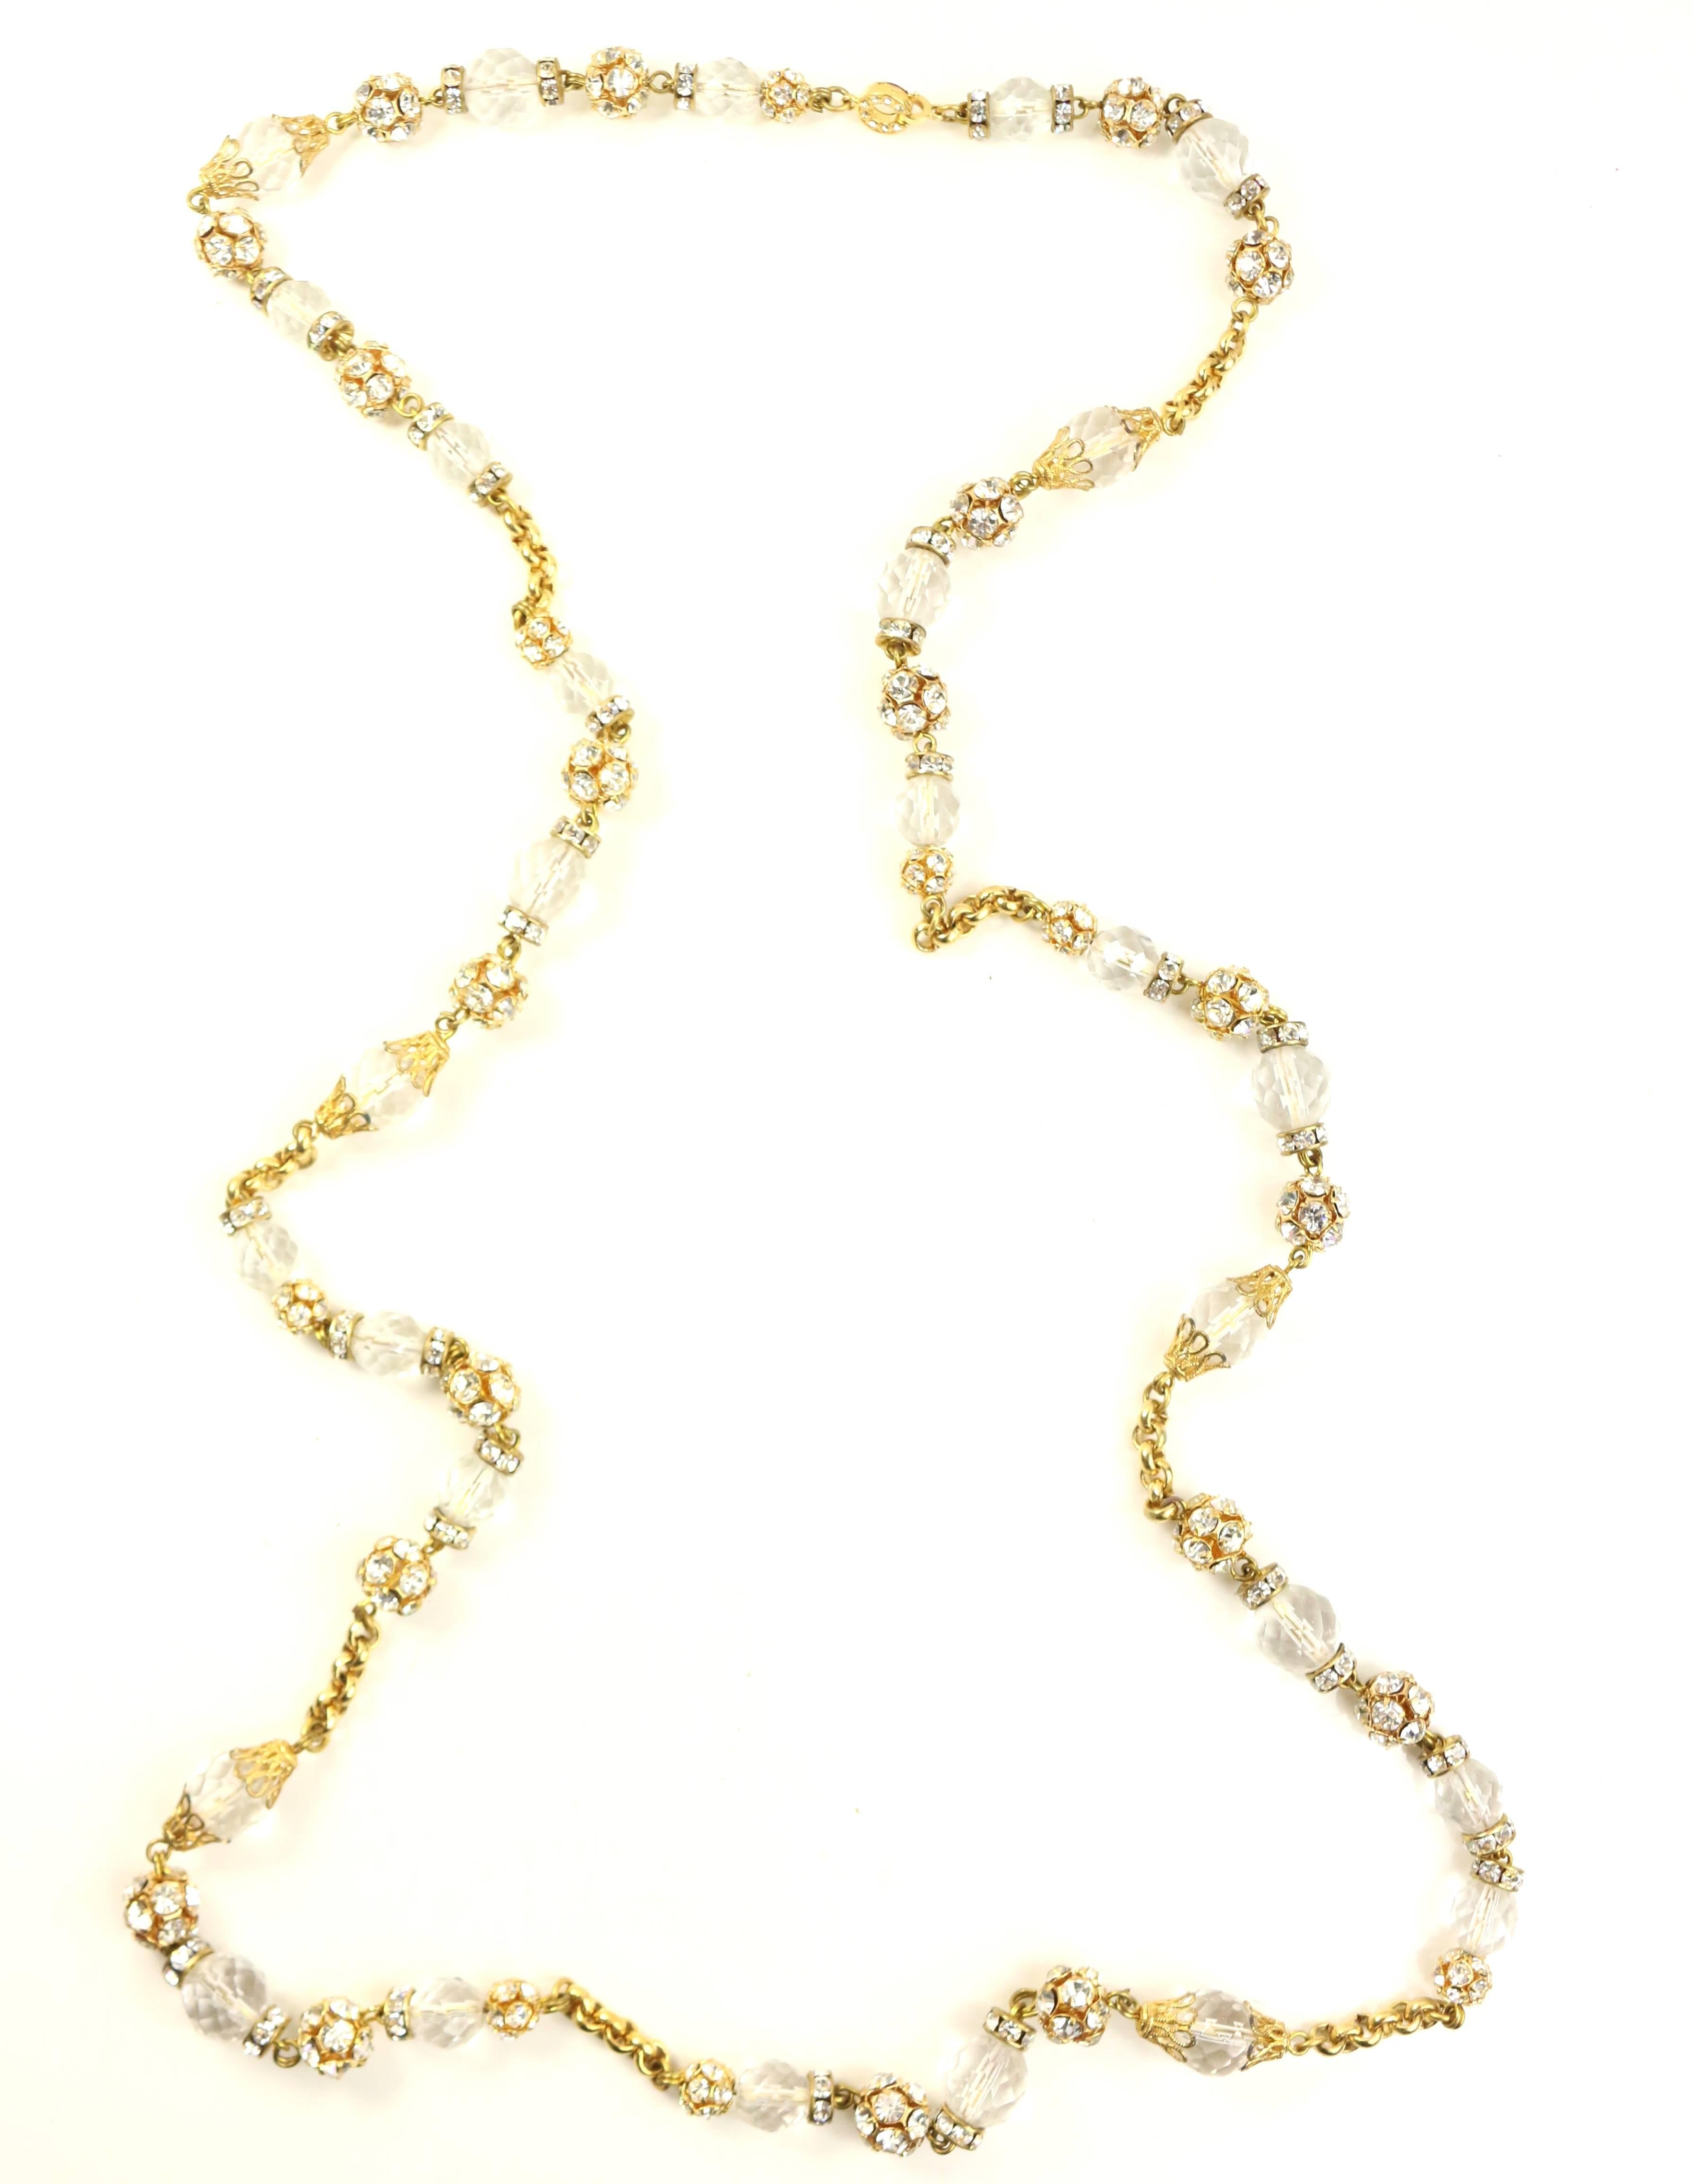 - Vintage 80s Escada gold toned metal with crystal rhinestones and glass chain necklace. 

- Gold toned with rhinestones "C" hook closure. 

- Length: 43 inches. 

- 50% glass, 50% metal. 

